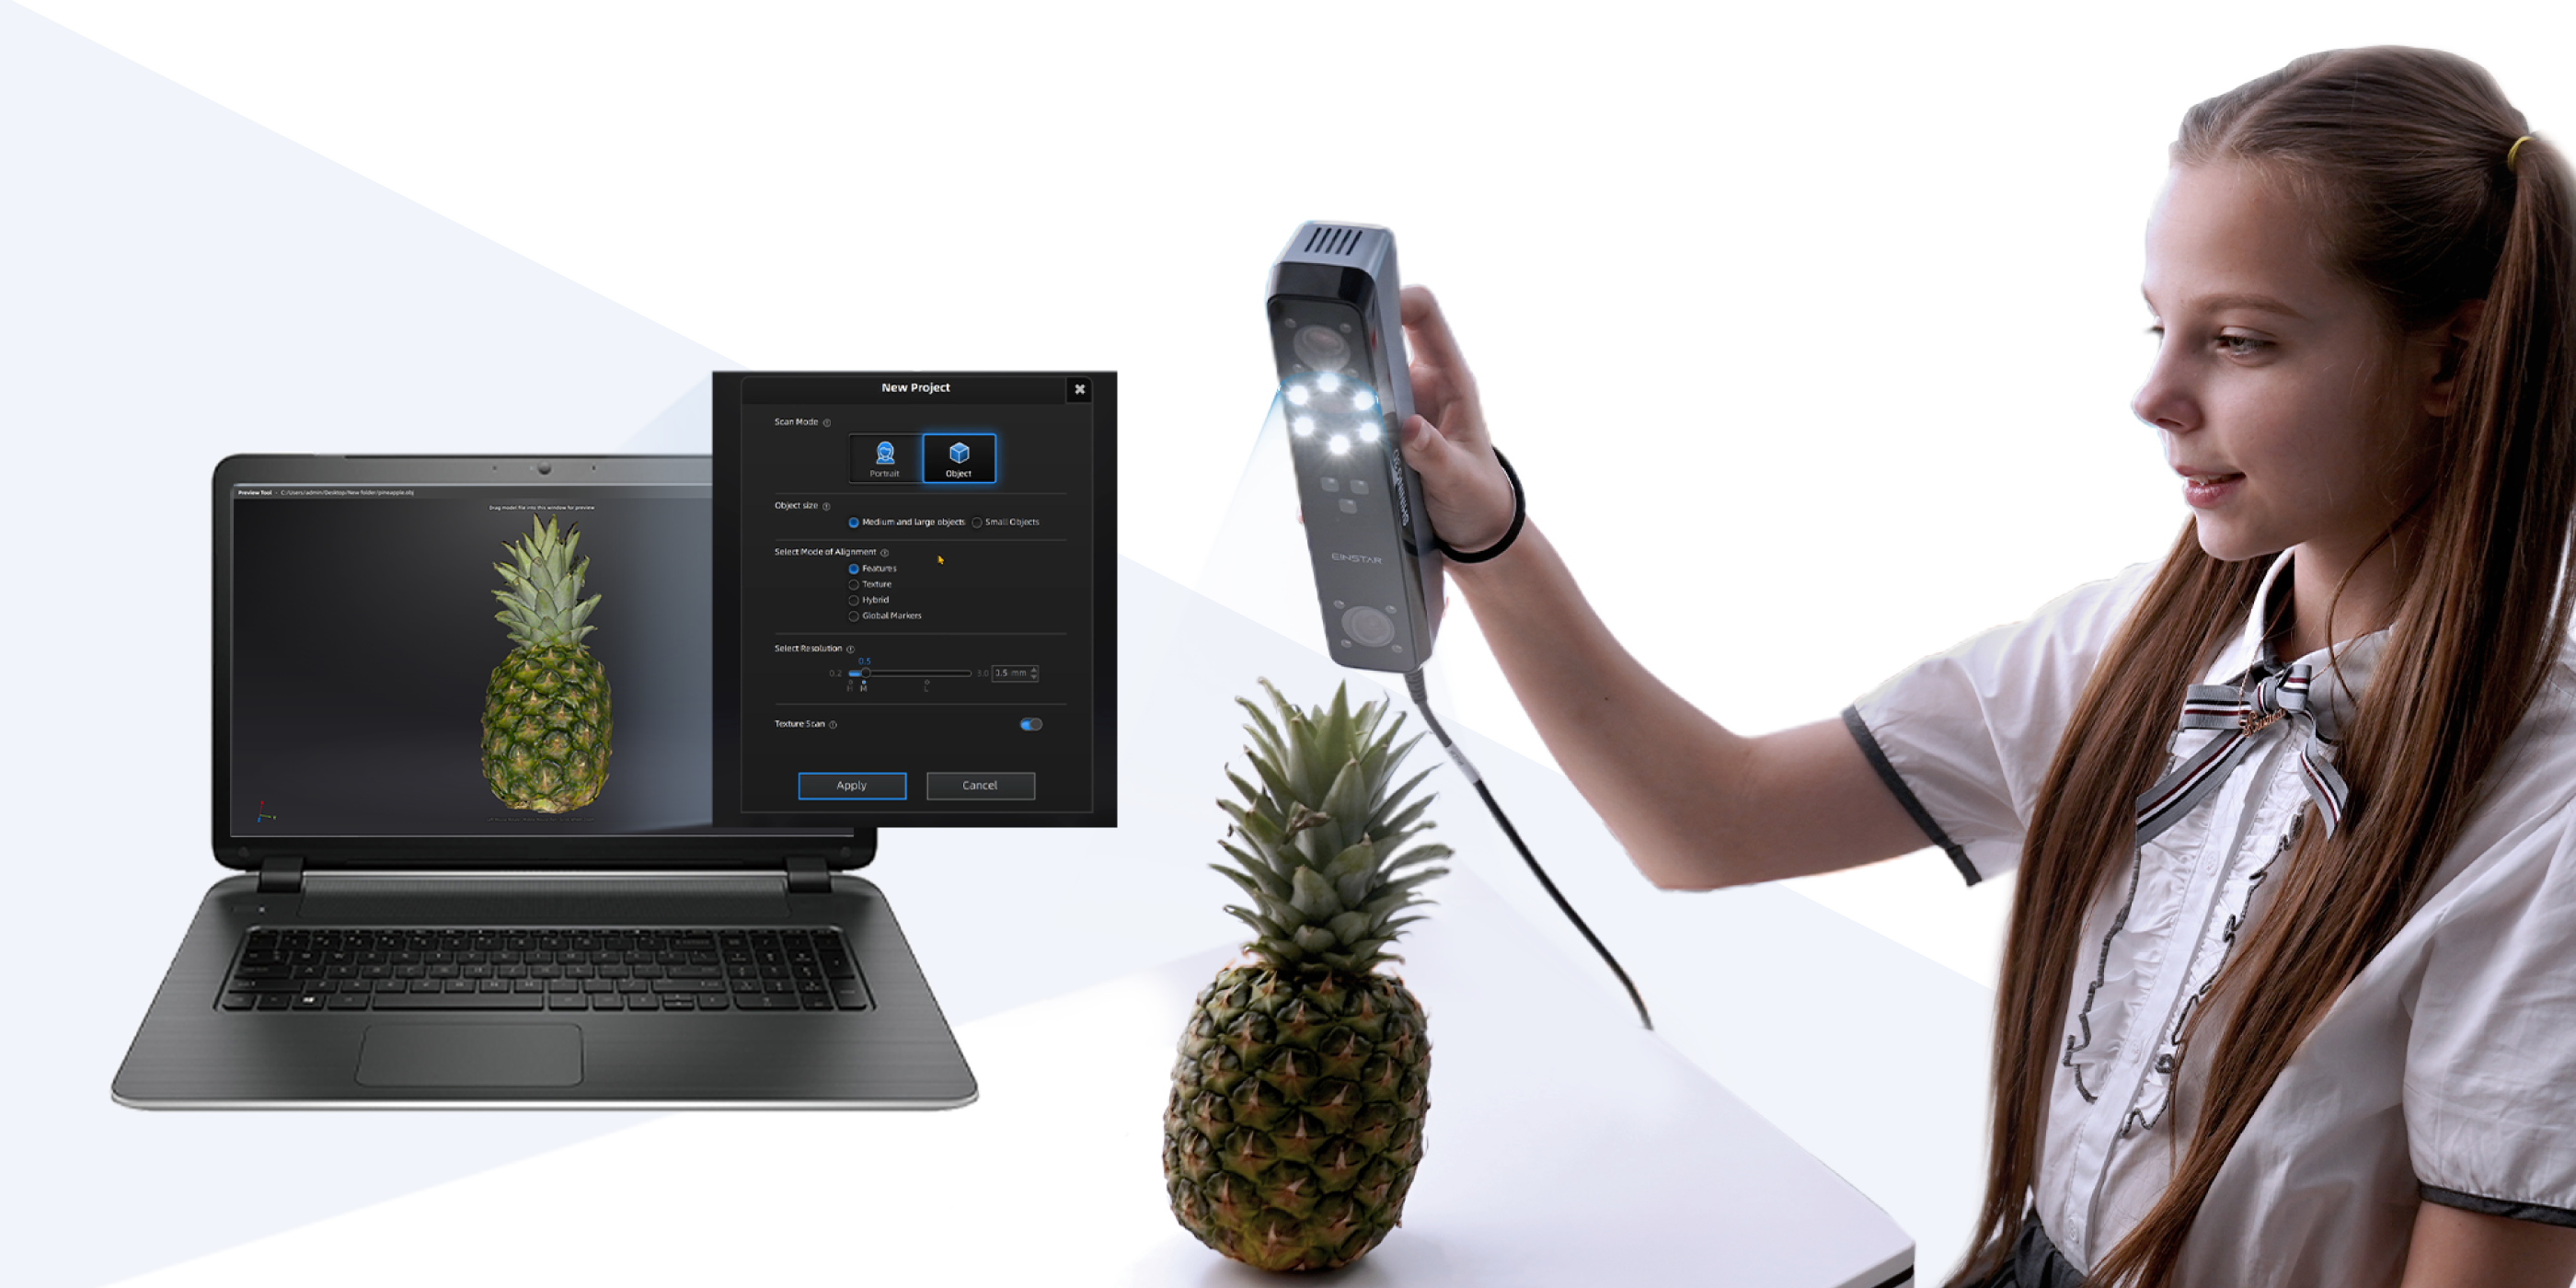 Streamlined User Experience: Smooth and fast scanning with EINSTAR 3D scanner, speed up to 14 FPS, easy setup and operation.